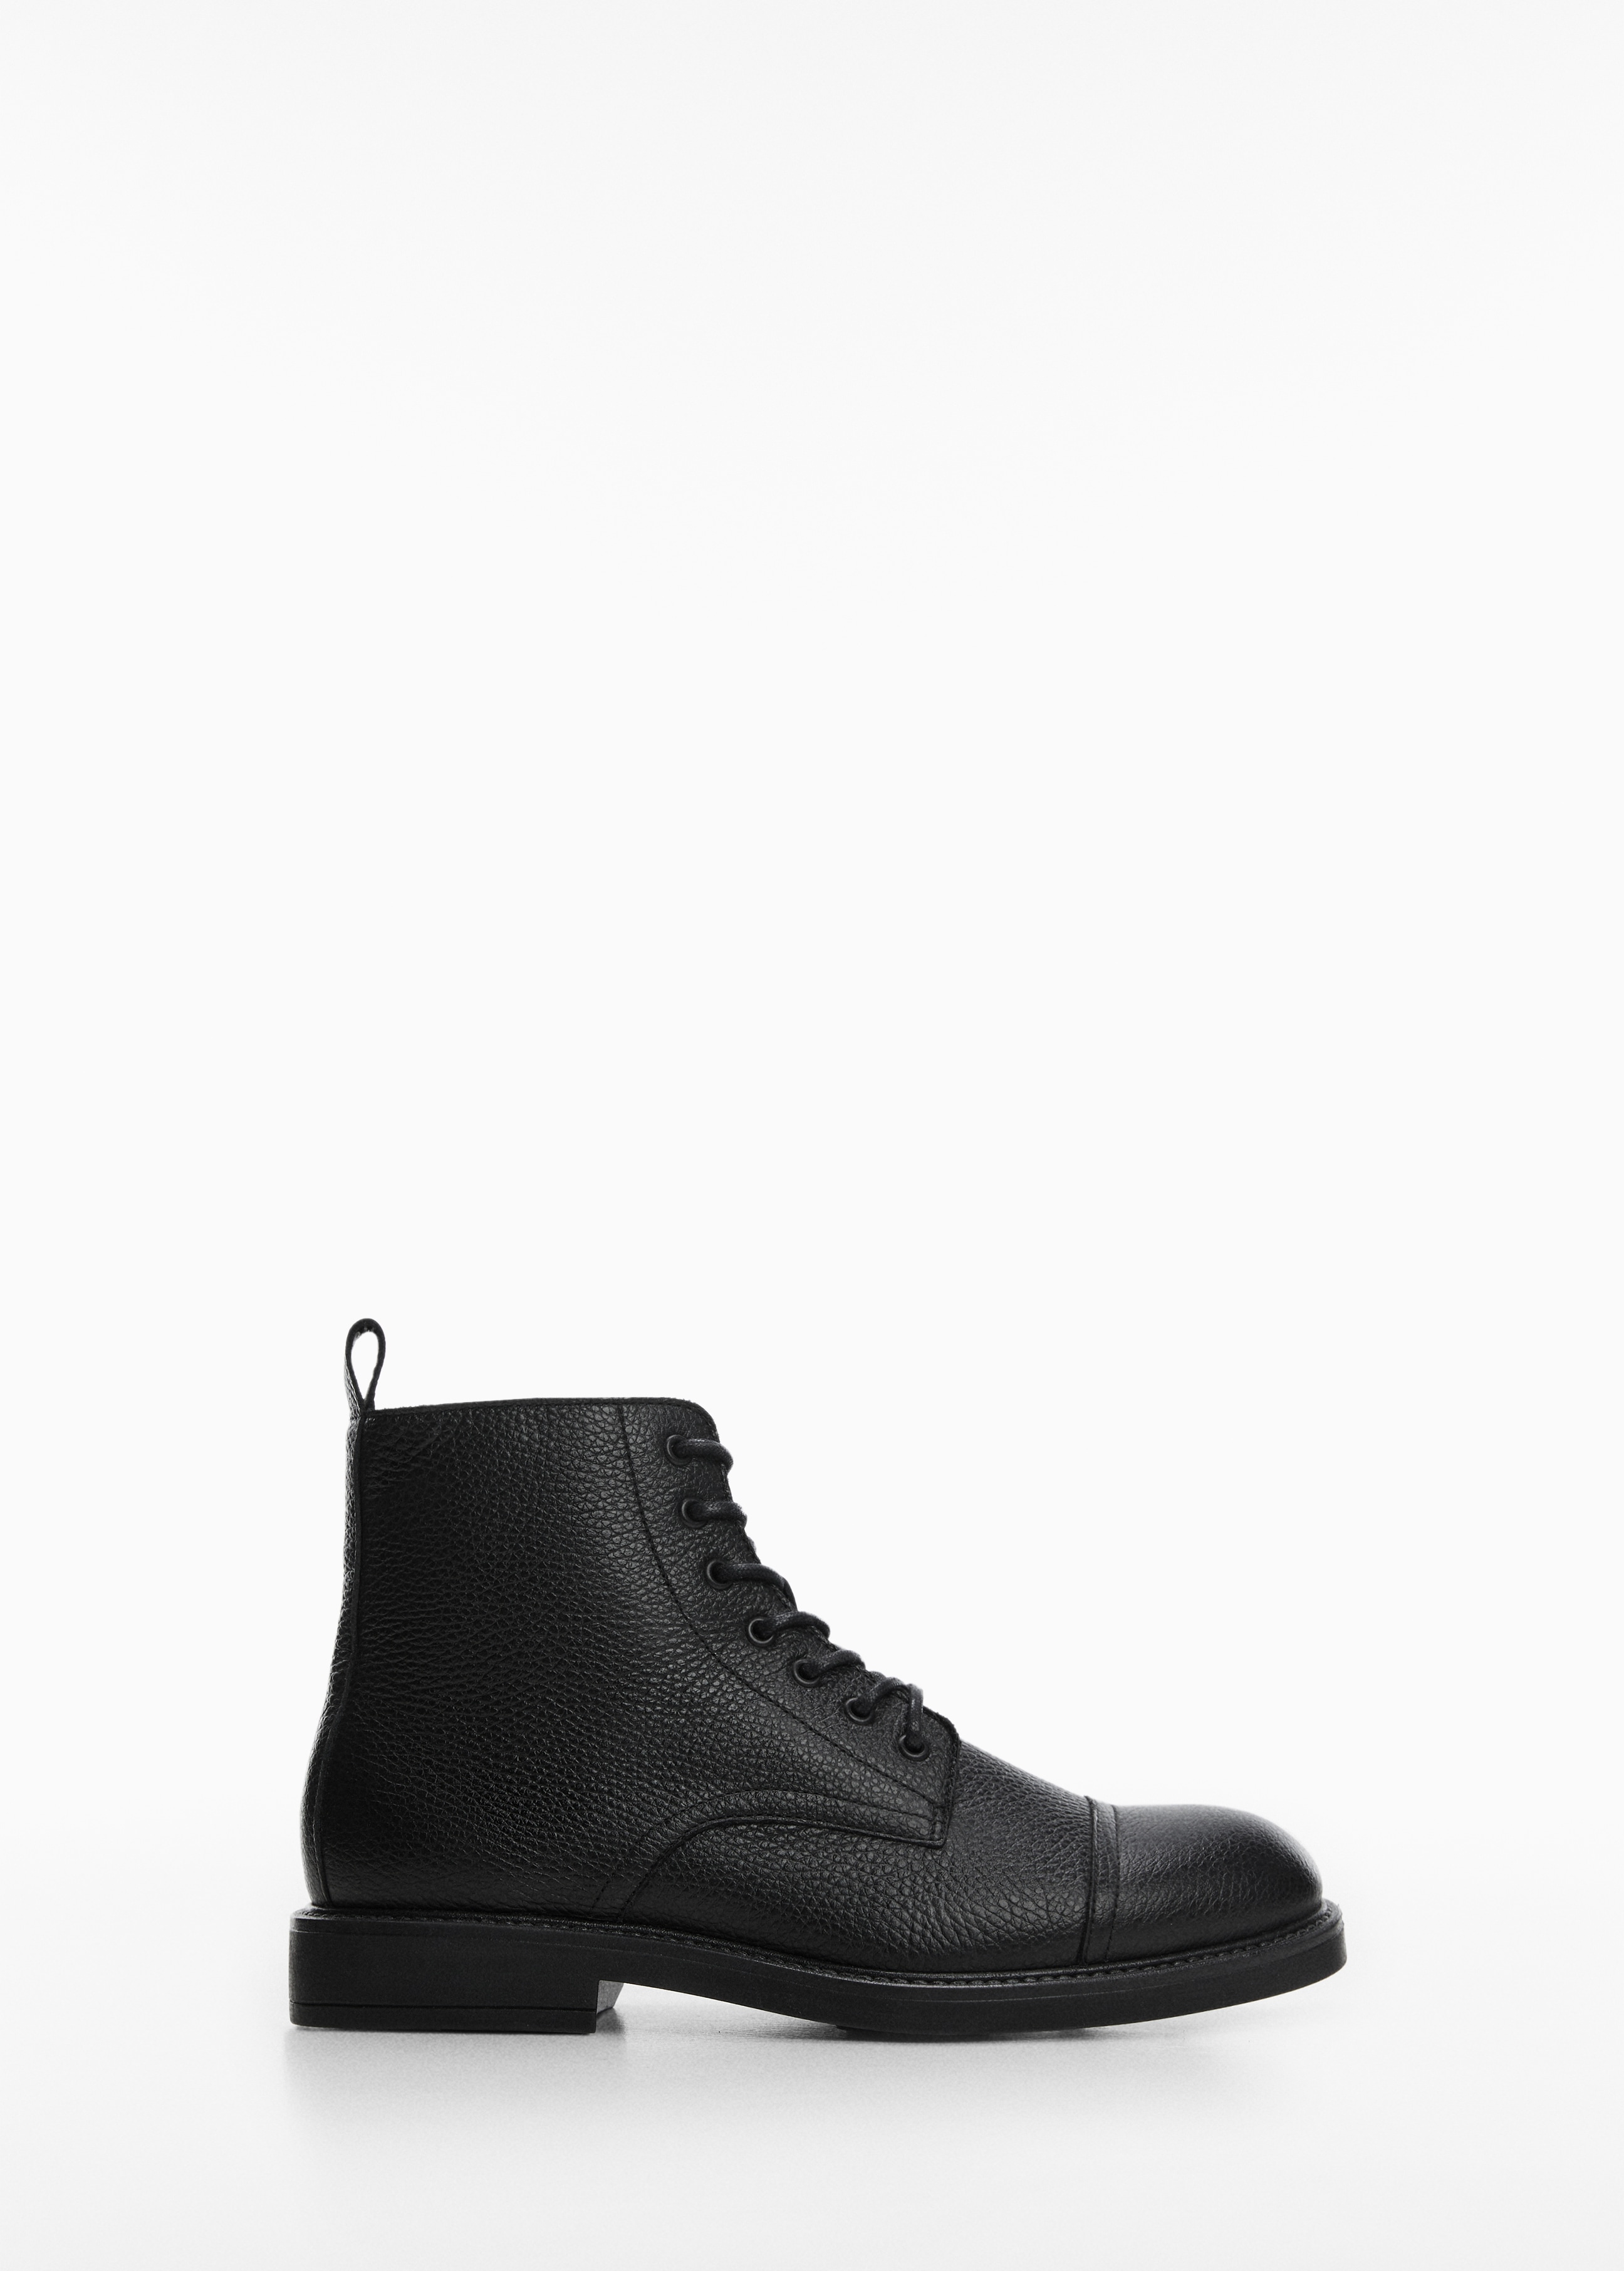 Lace-up leather boots - Article without model